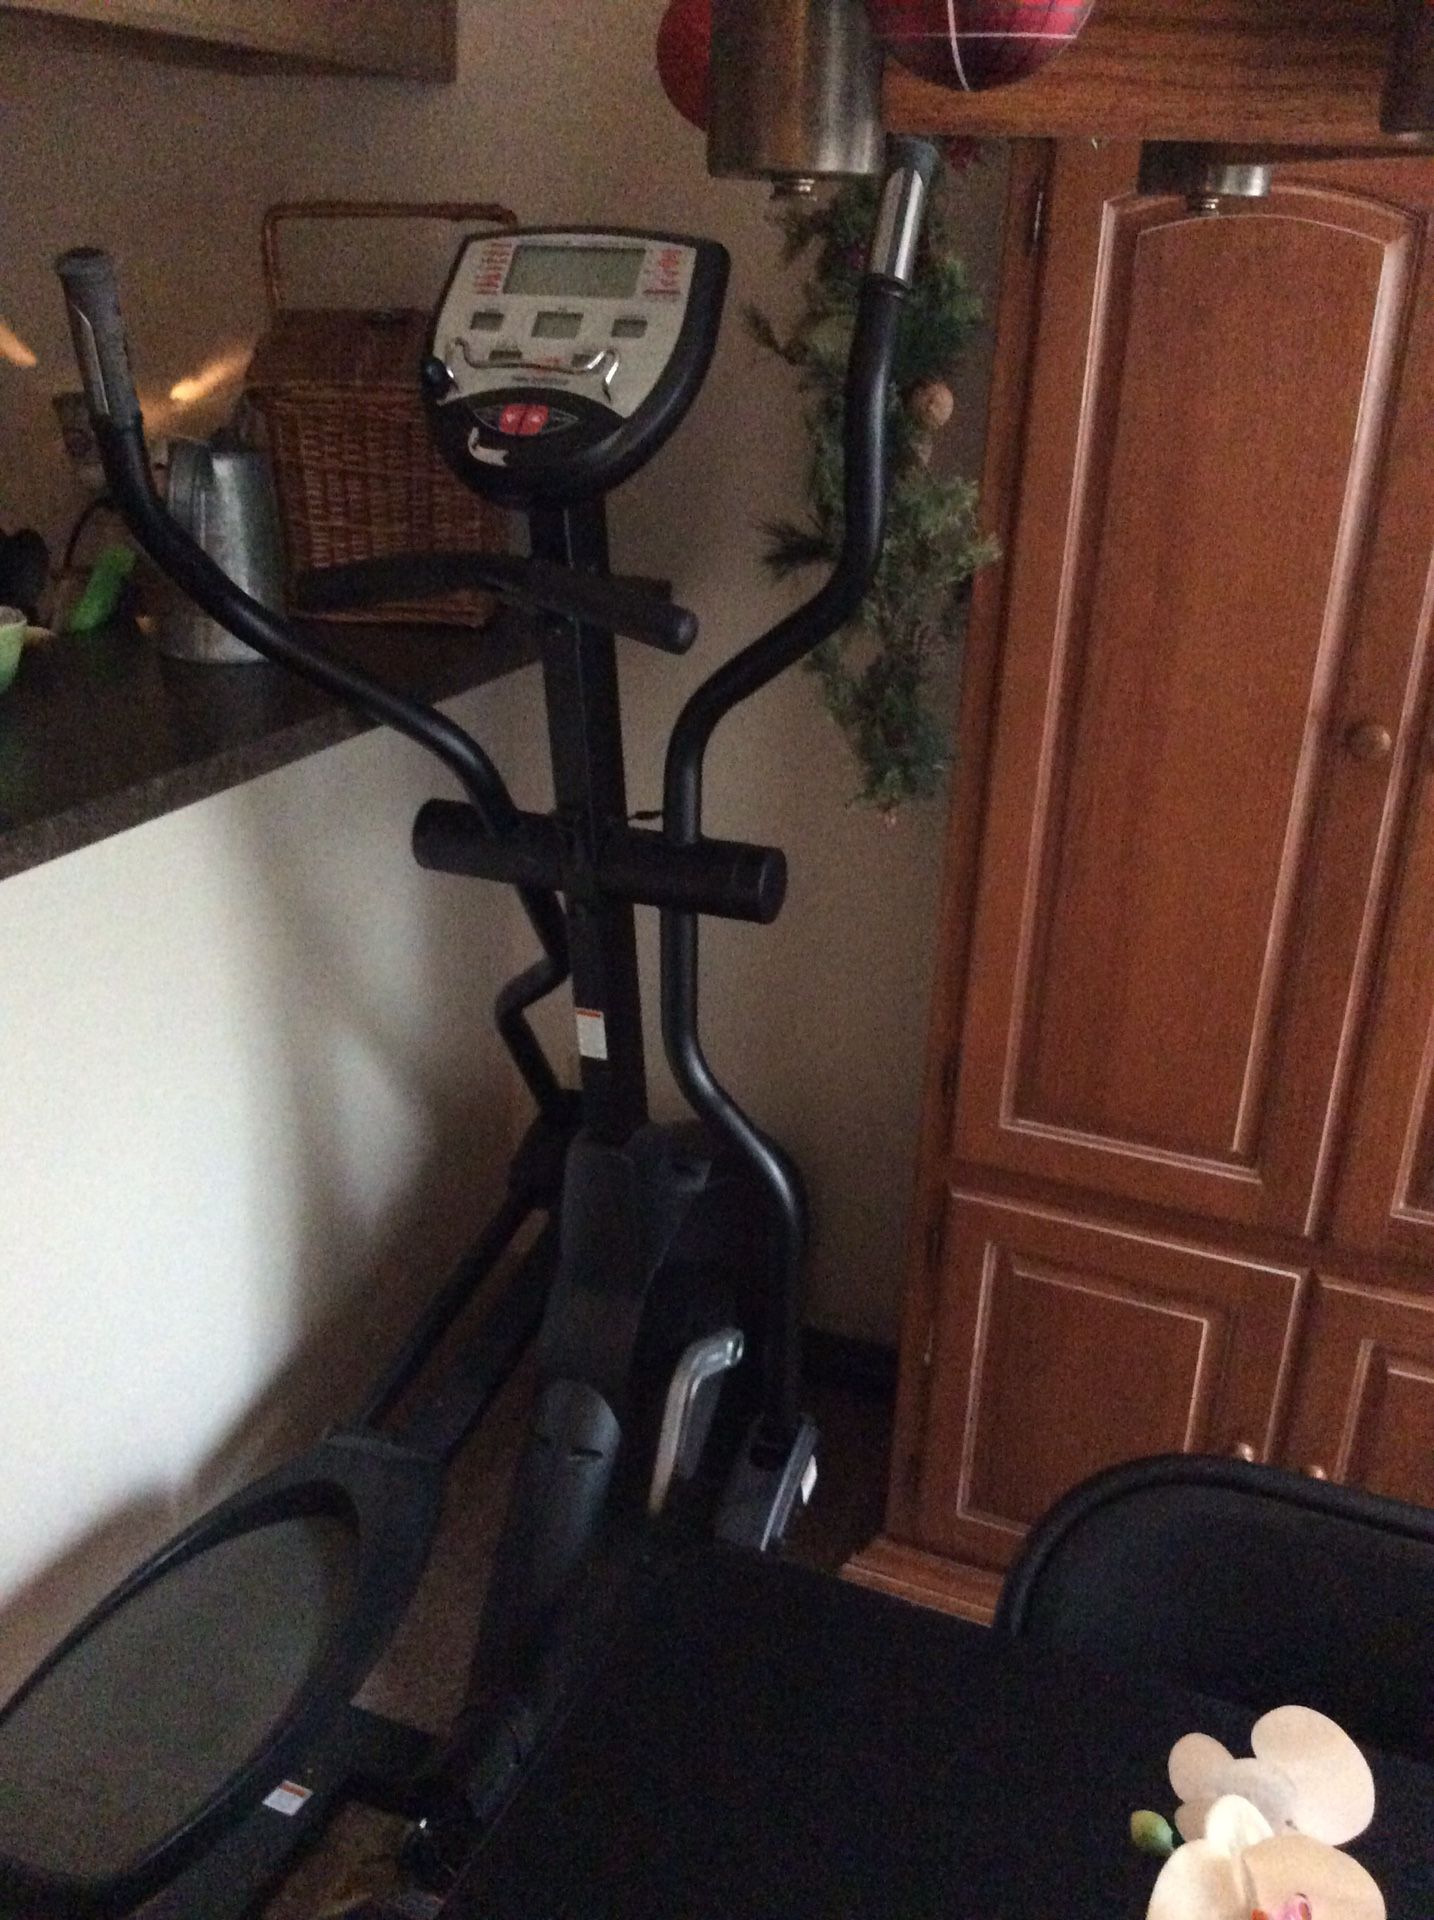 new balance, not used much. Elliptical. Have the plug adapter, and it can take batteries.